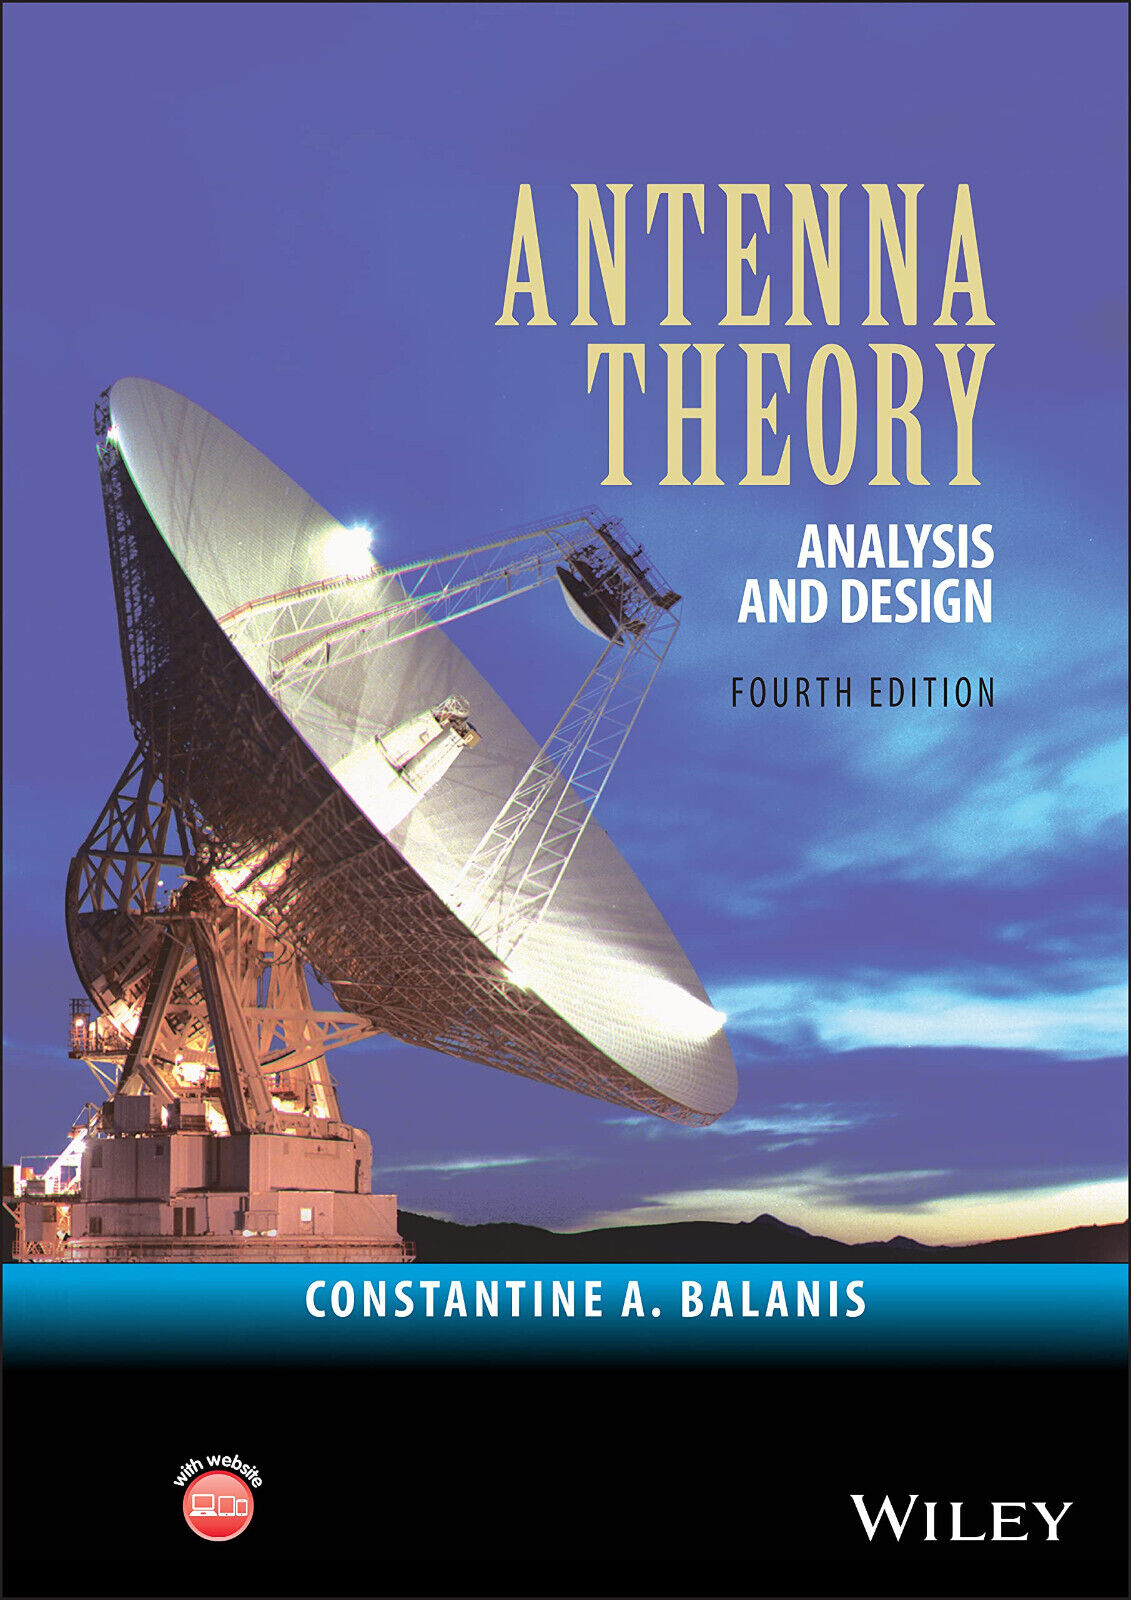 Antenna Theory - Constantine A. Balanis - Wiley John + Sons, 2016